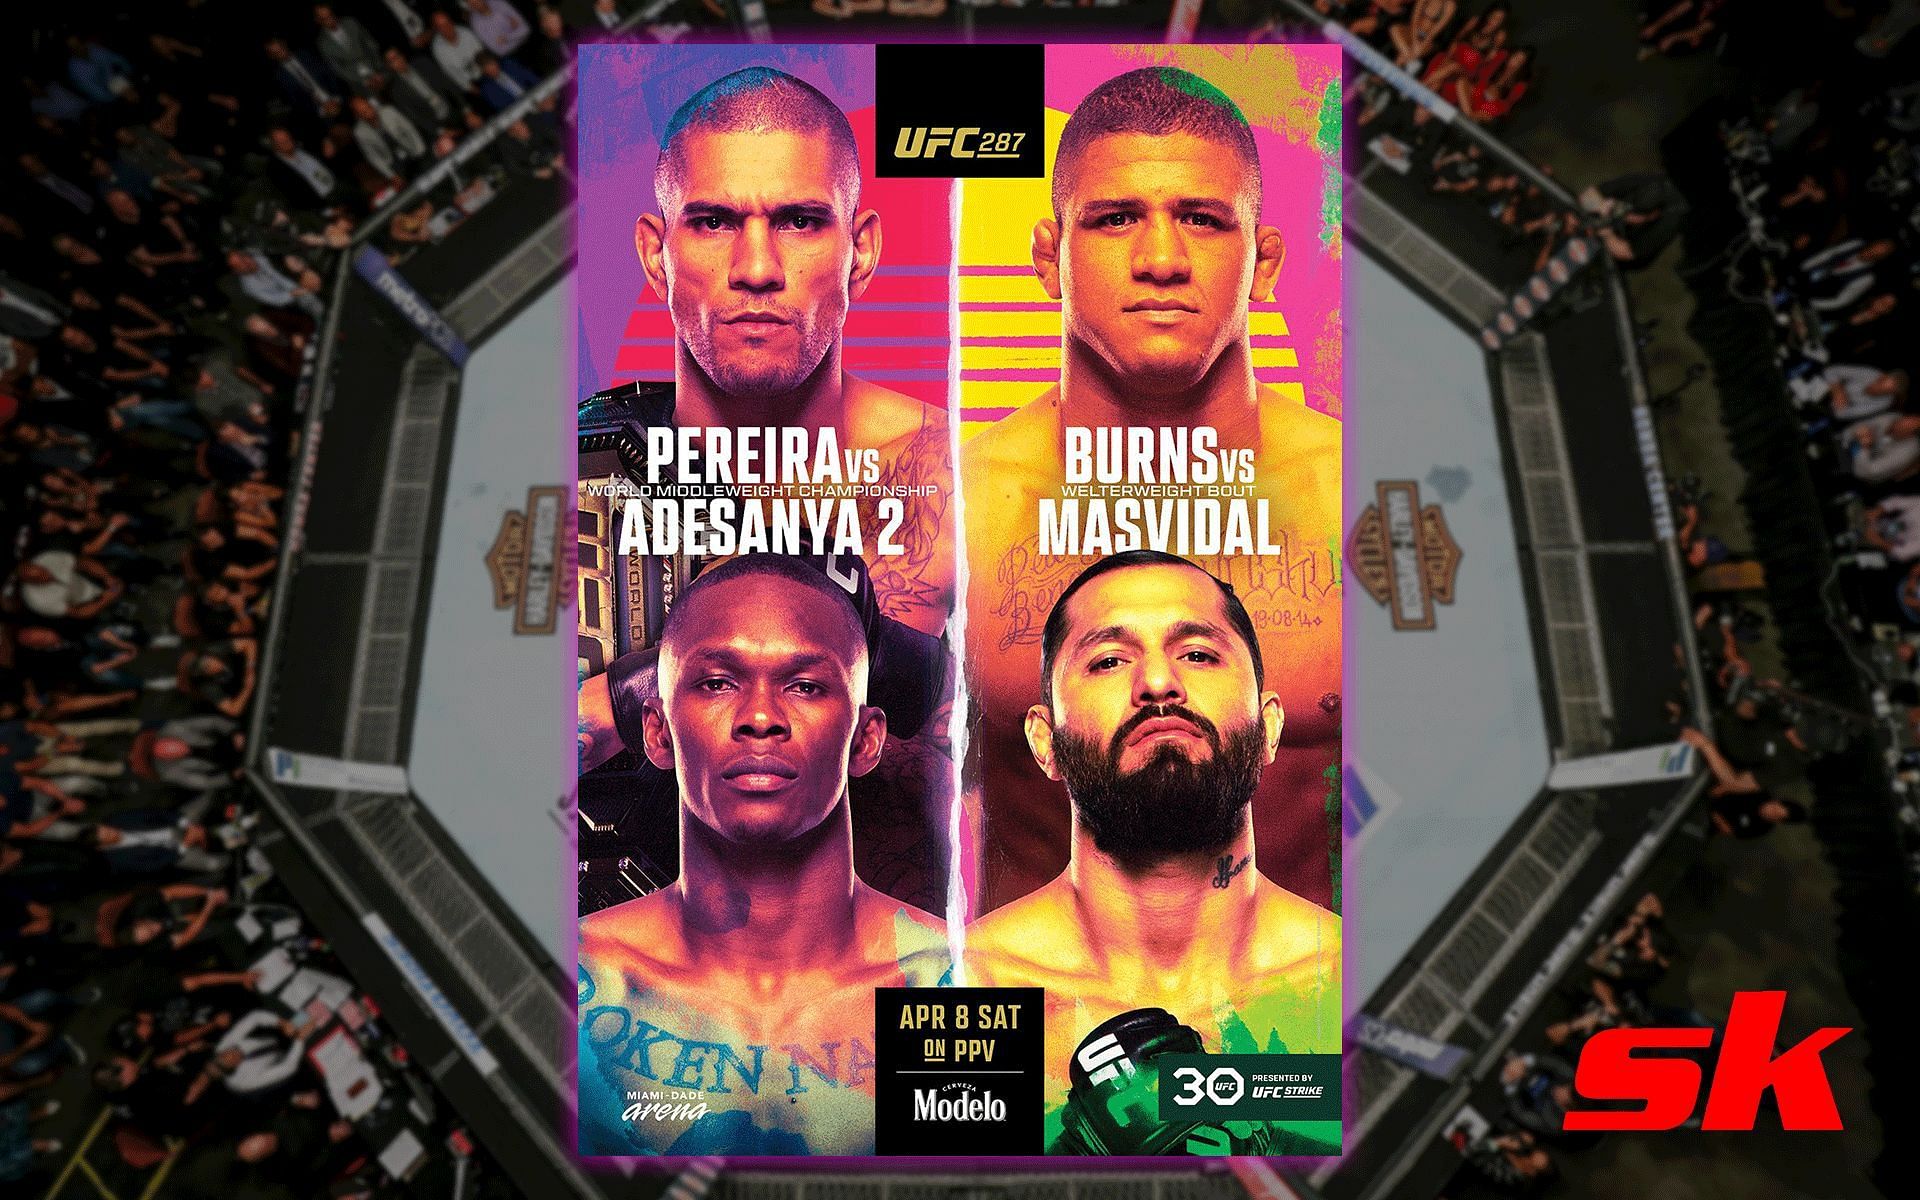 UFC 287 poster. [Images courtesy: background image from Getty Images and poster from UFC]